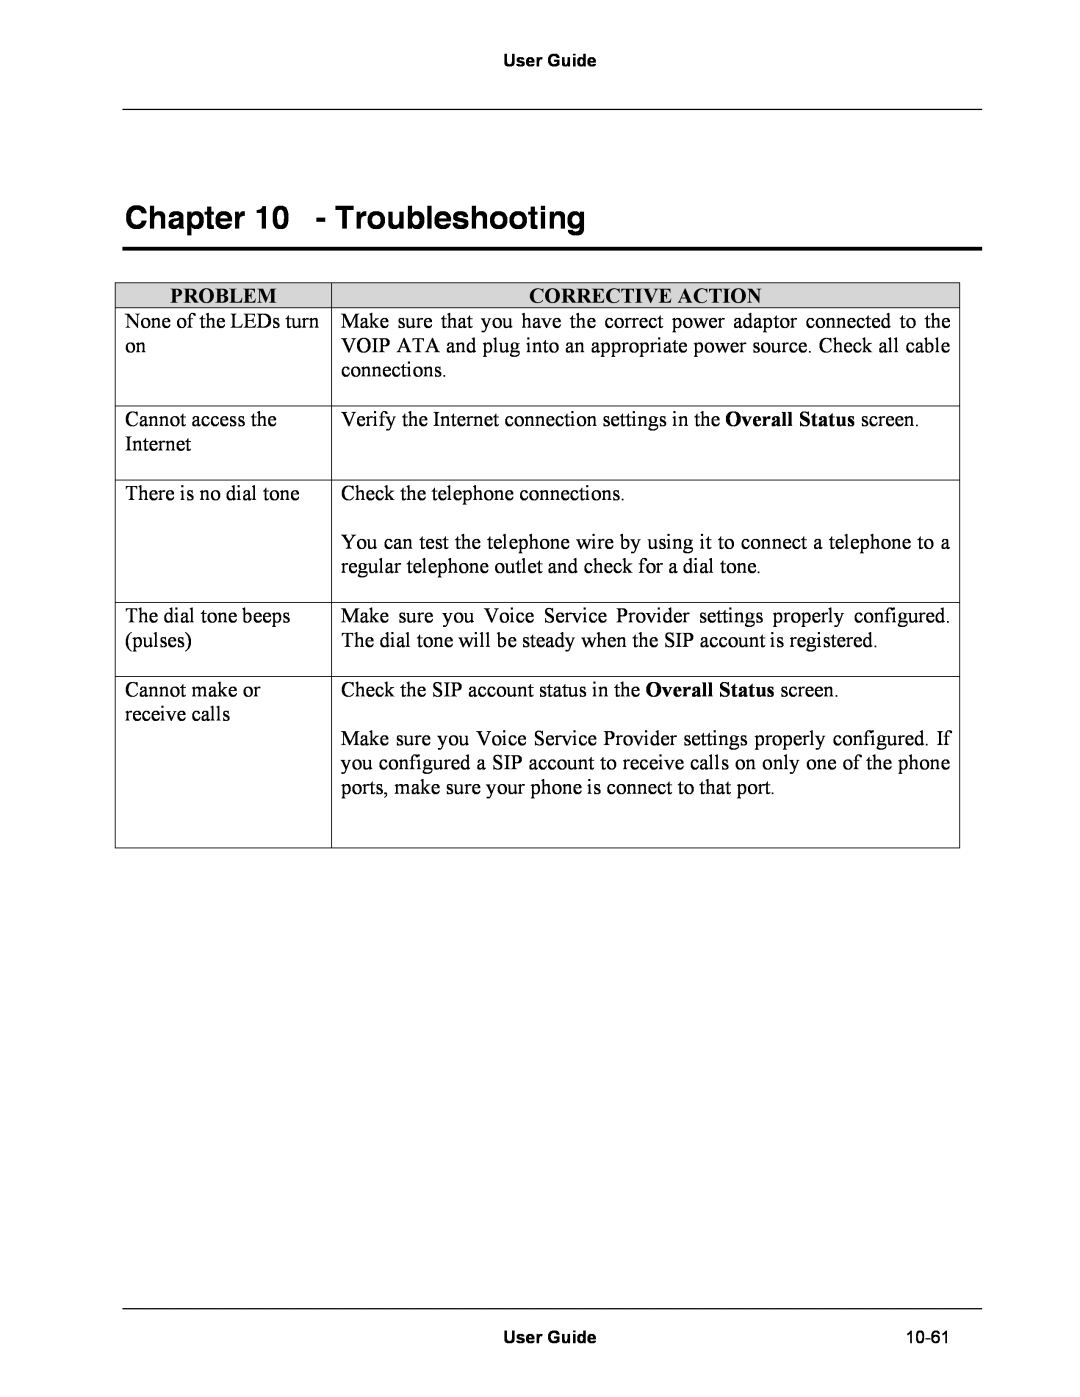 Netopia Network Adapater manual Troubleshooting, Problem, Corrective Action 